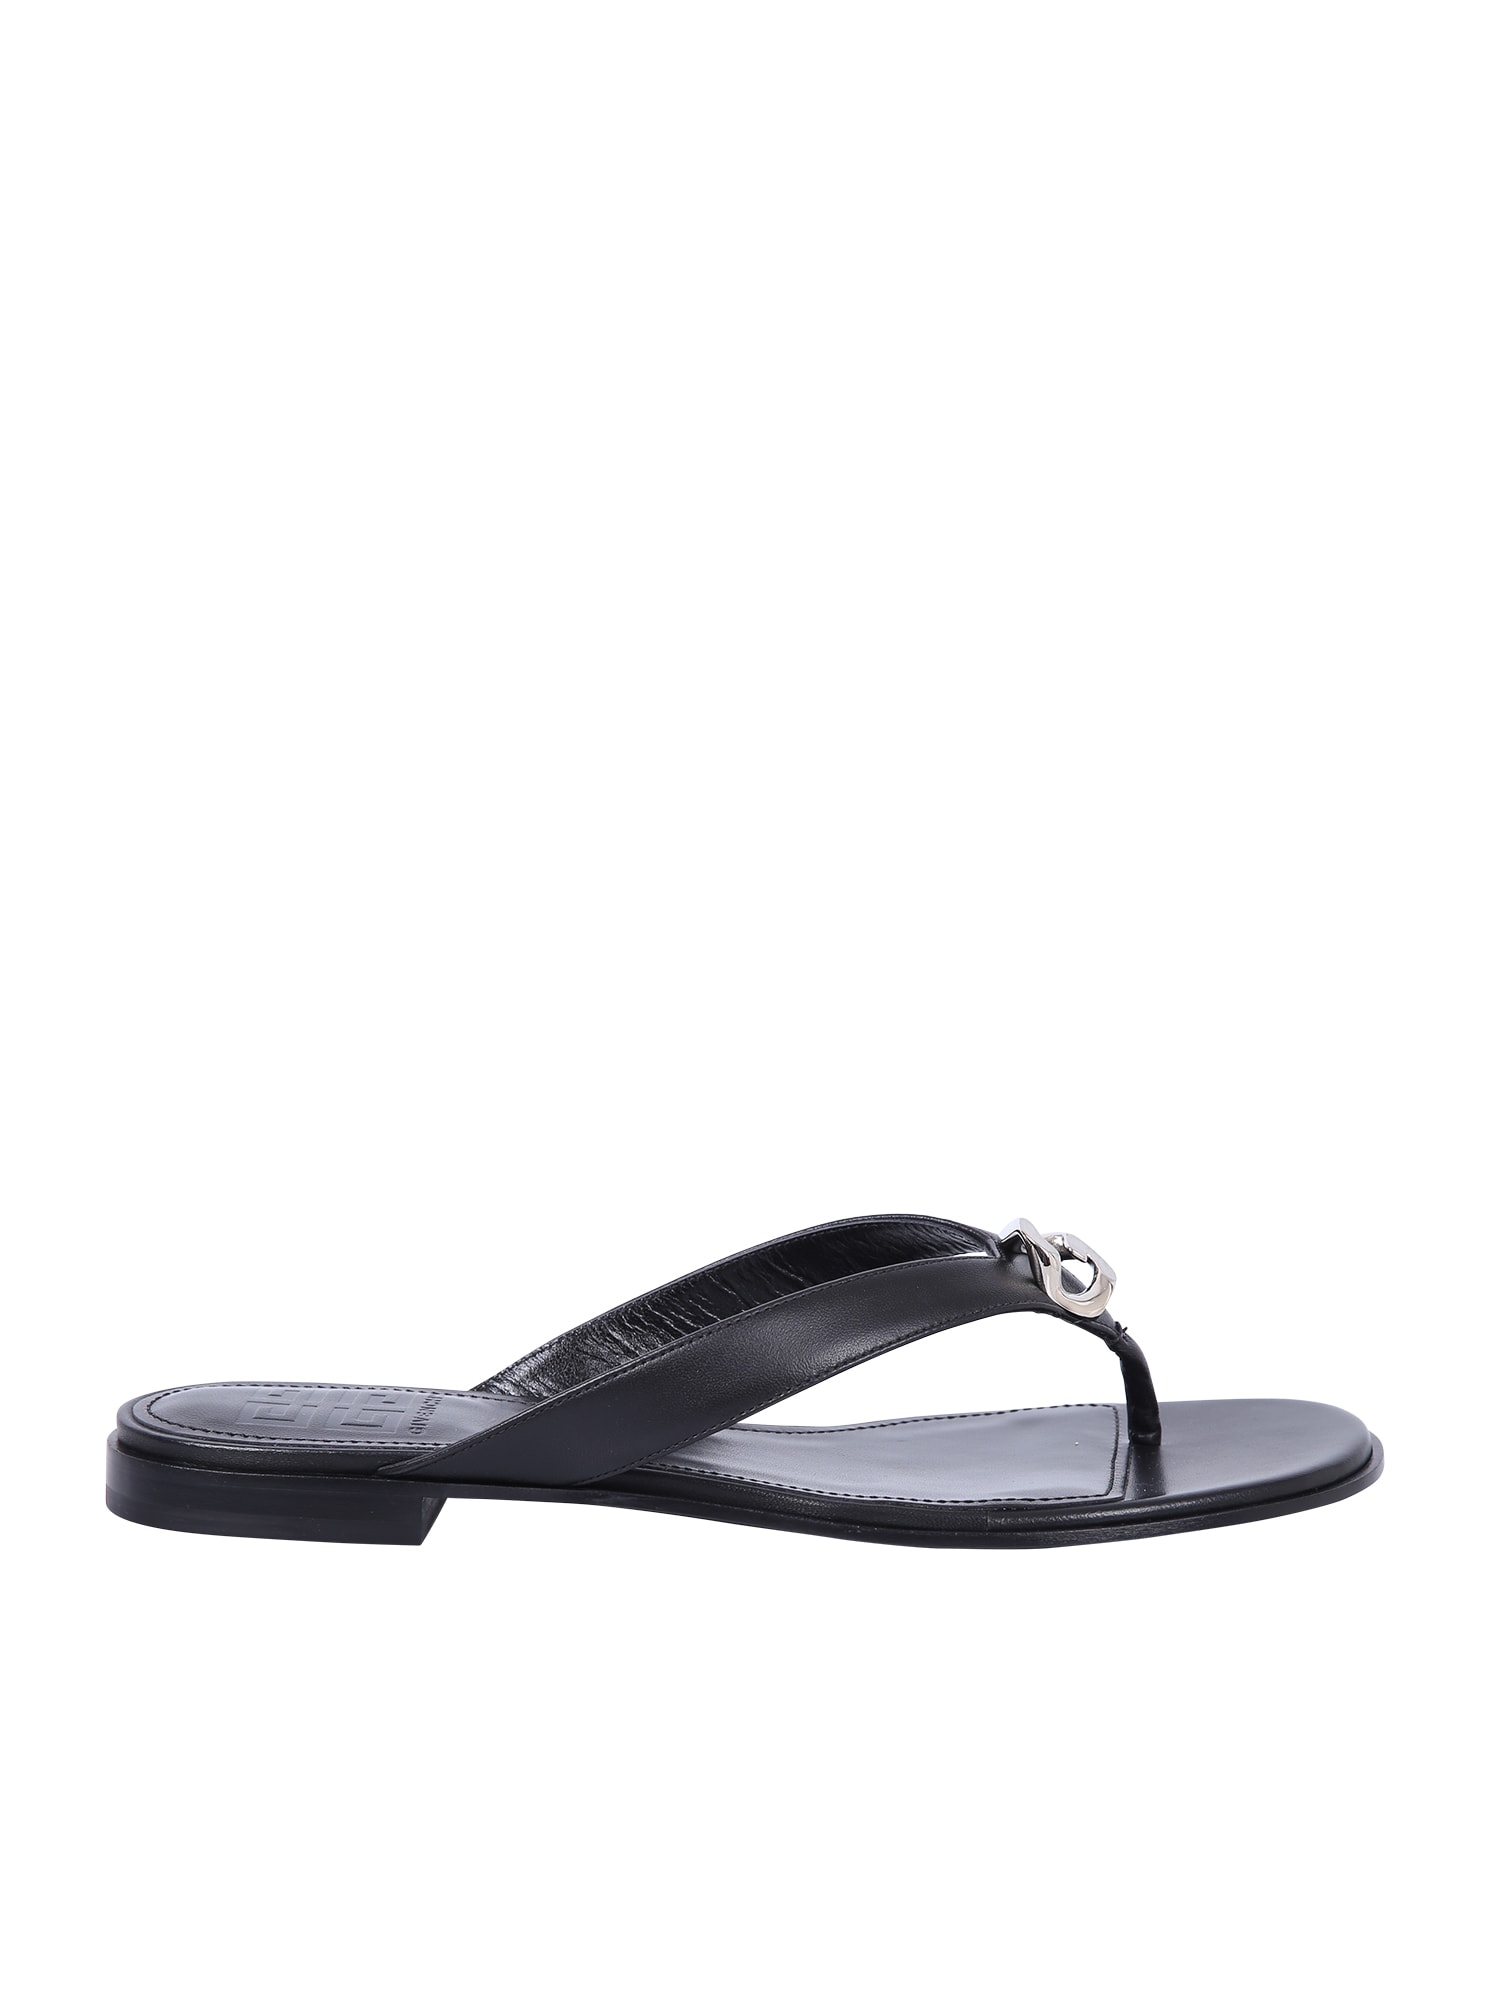 GIVENCHY BRANDED SANDALS,BE305C E0YZ 001